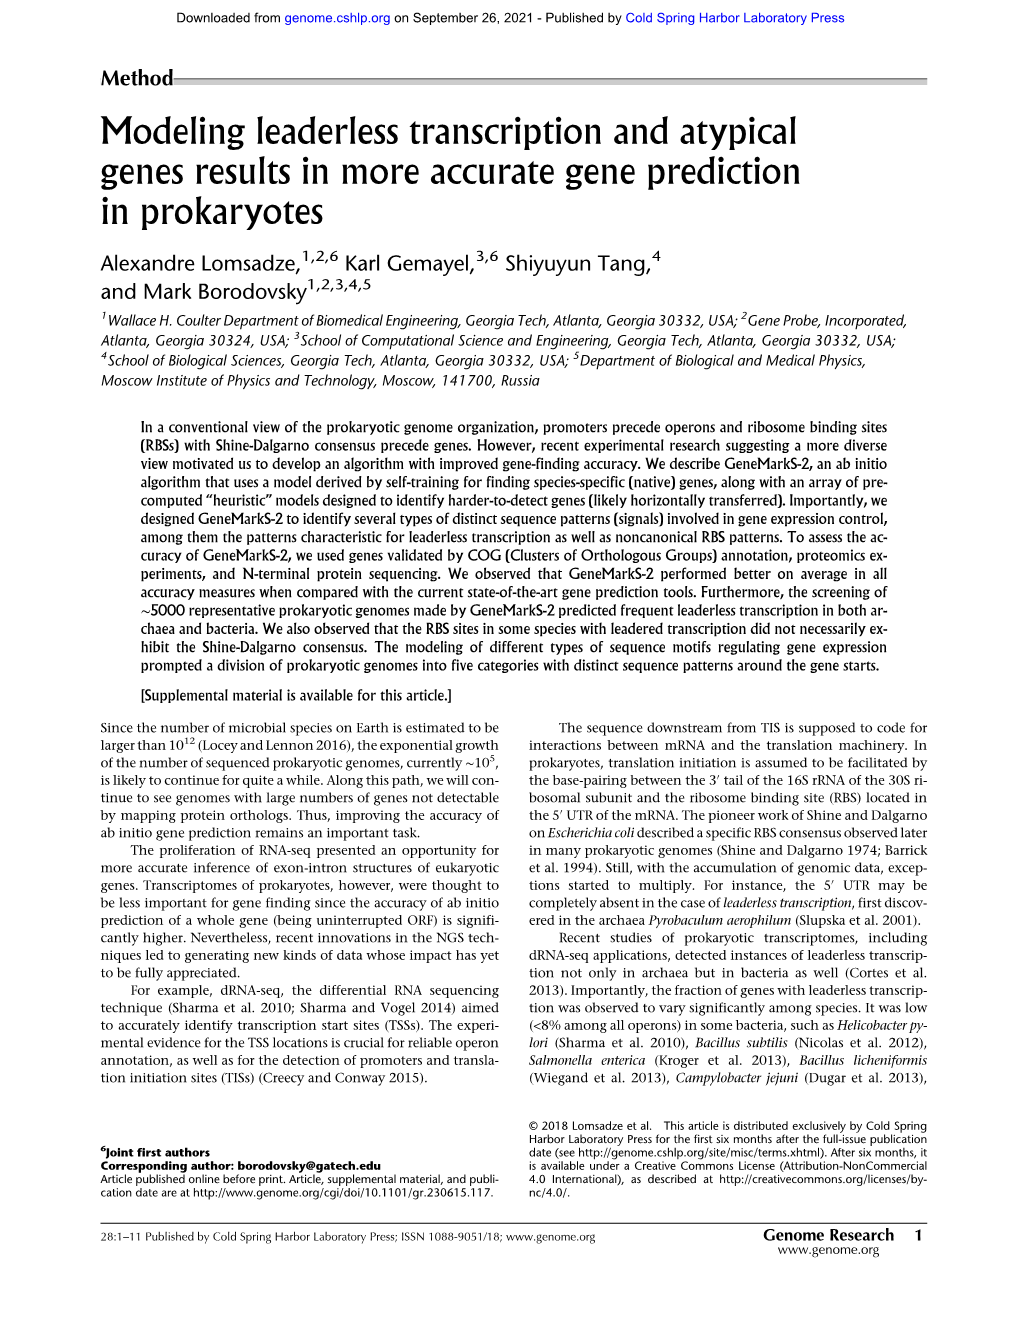 Modeling Leaderless Transcription and Atypical Genes Results in More Accurate Gene Prediction in Prokaryotes